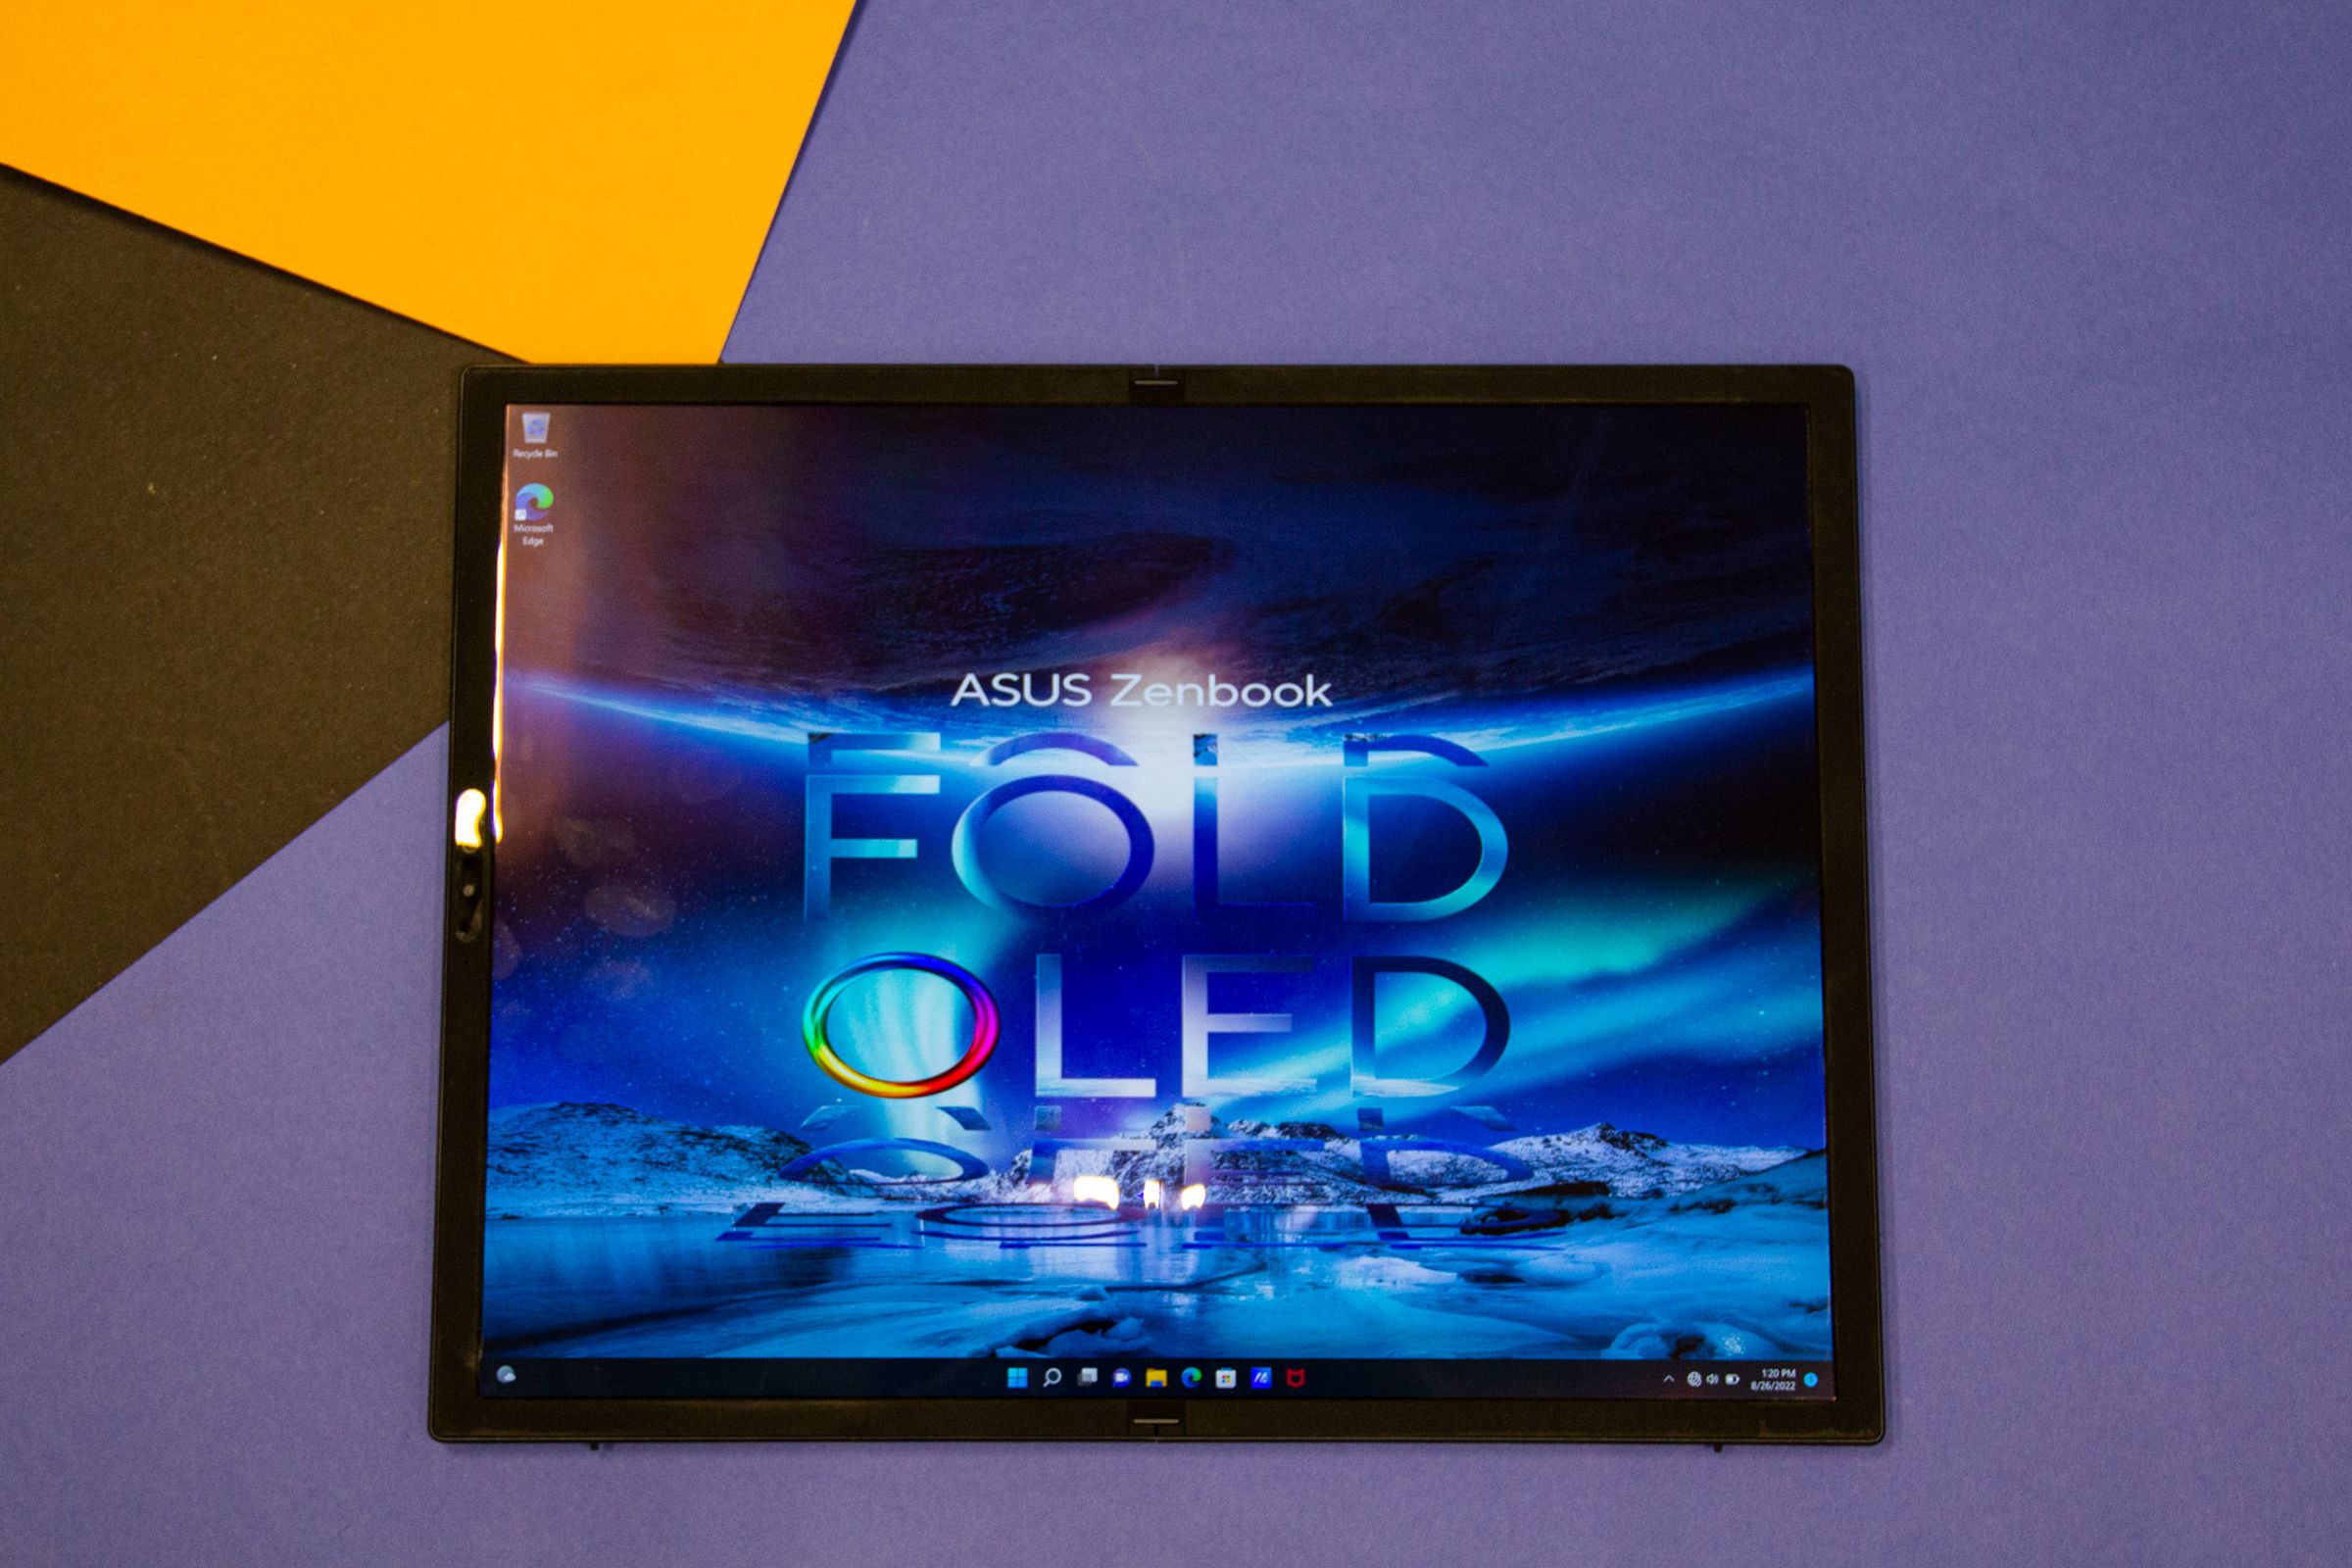 The Asus Zenbook Fold OLED in laptop mode laid out on a table. The screen displays the Asus Zenbook Fold OLED logo on a blue background.